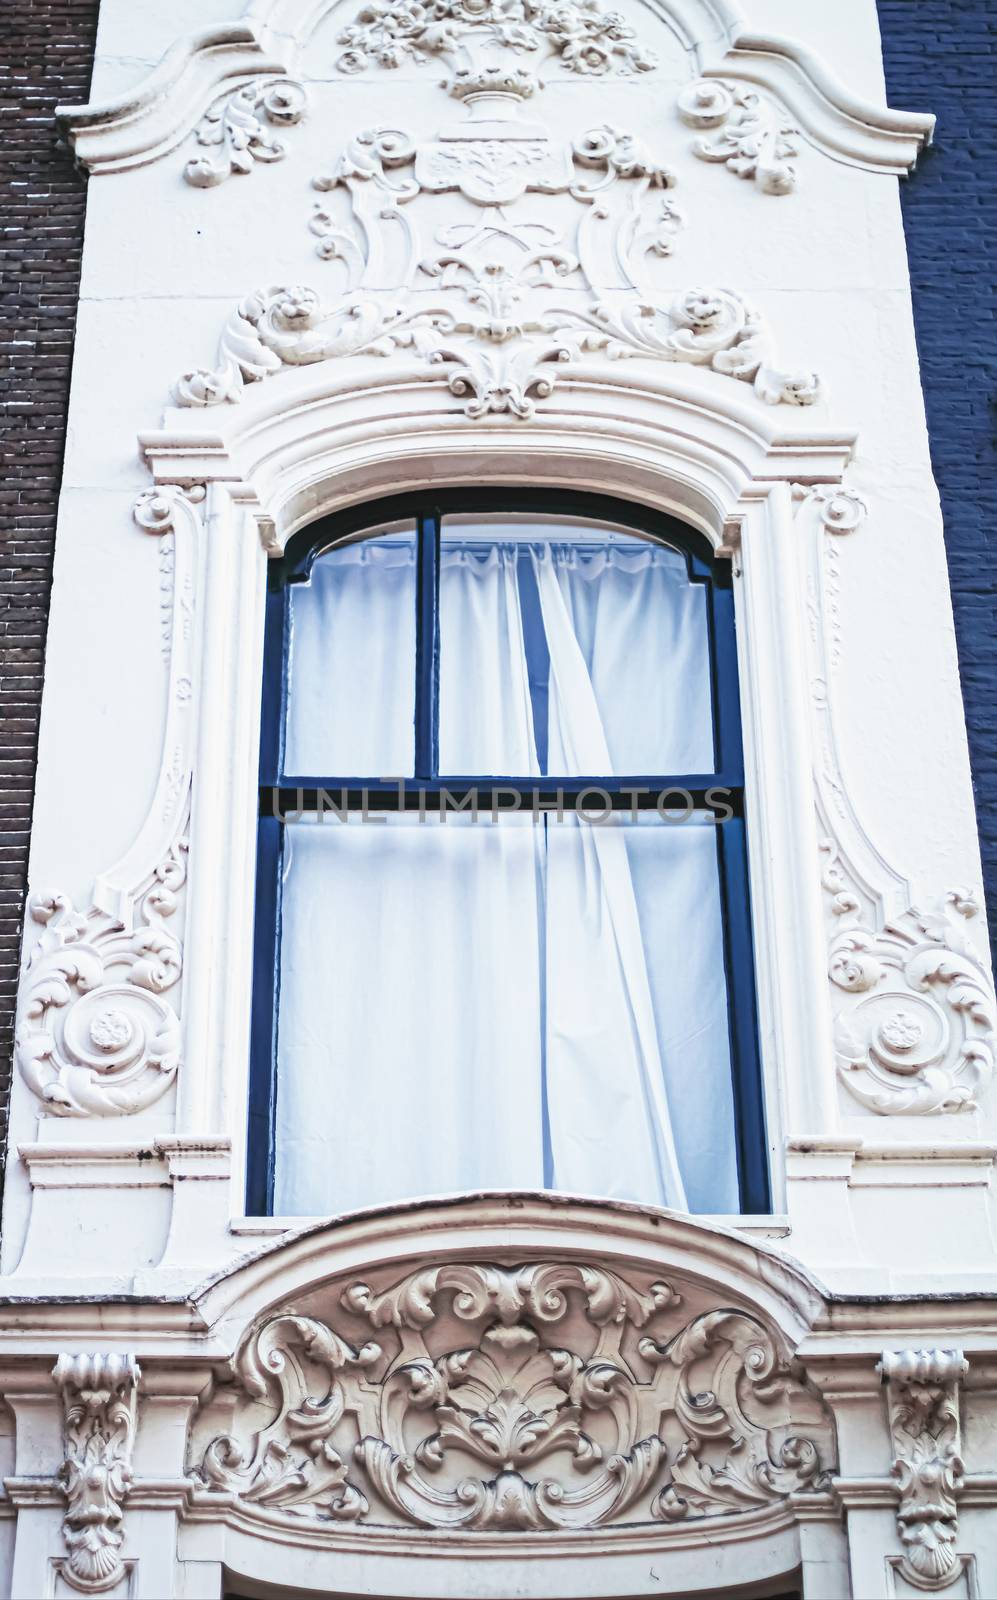 Architectural detail of a building on the main city center street of Amsterdam in Netherlands, european architecture